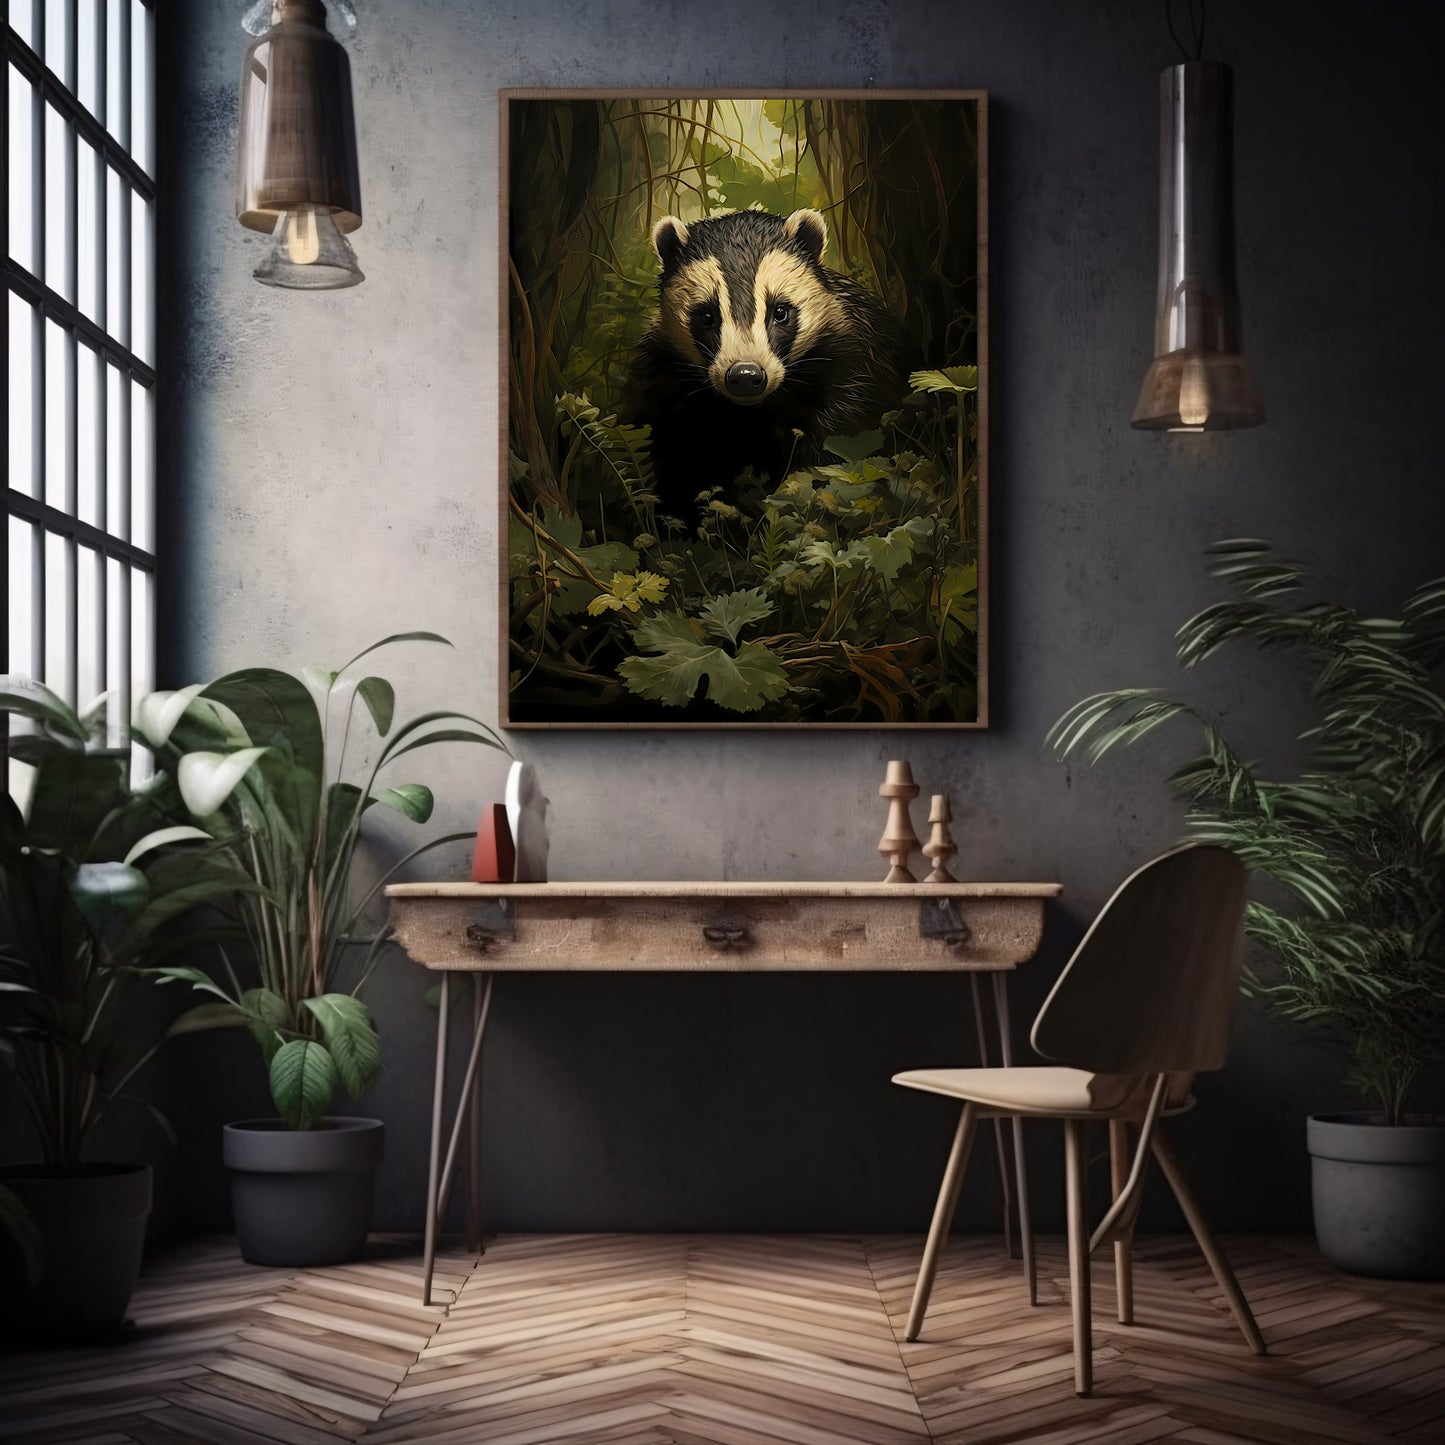 Badger in Moody Forest Wall Art Dark Cottagecore Vintage Dark Academia Print Woodland Animal Art Wildlife Painting Gothic Paper Poster Print